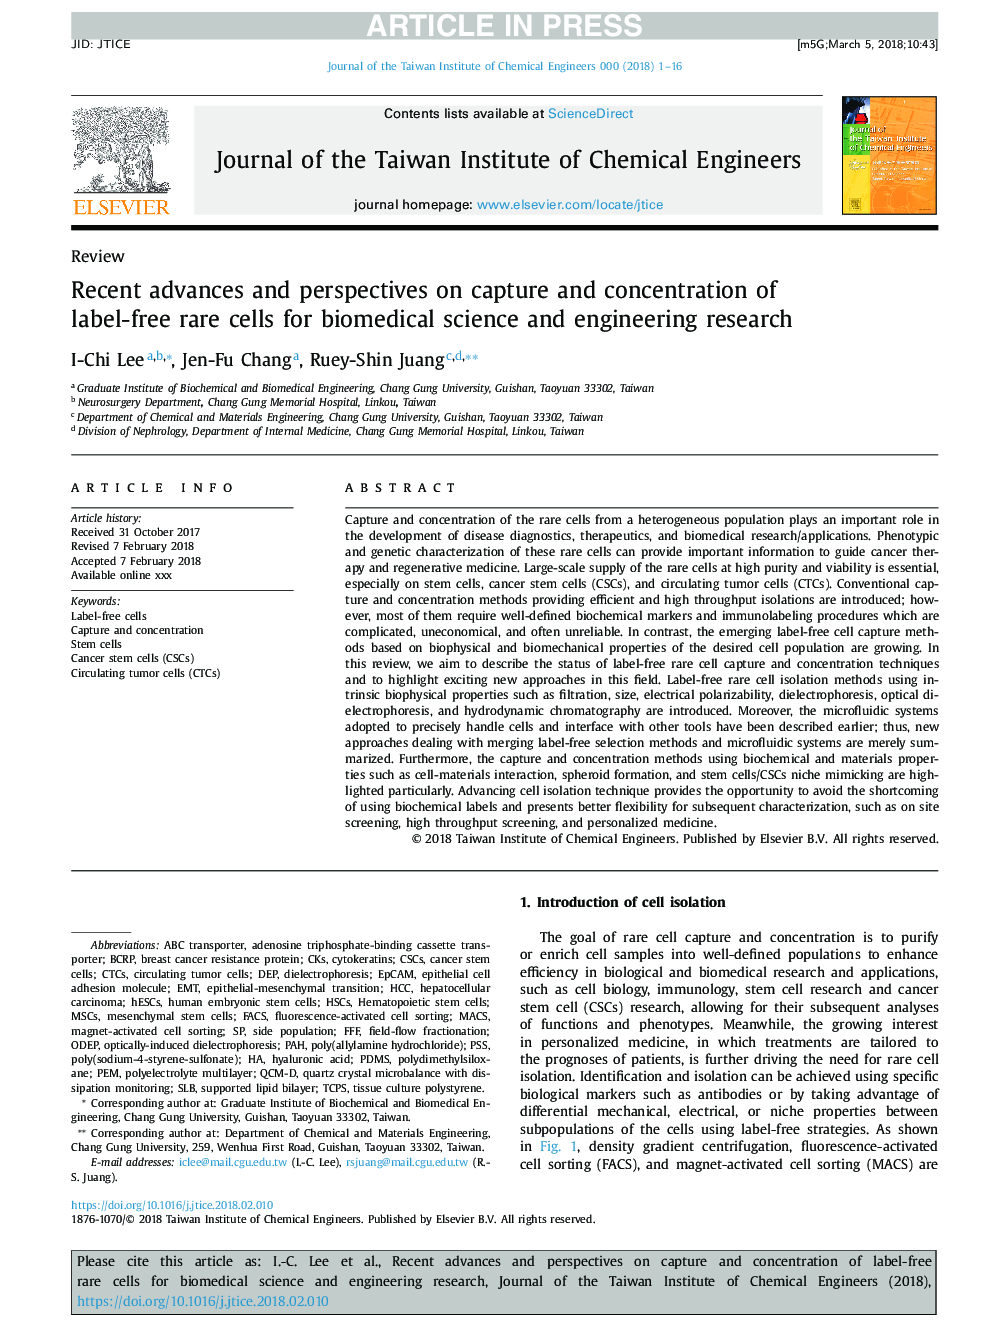 Recent advances and perspectives on capture and concentration of label-free rare cells for biomedical science and engineering research